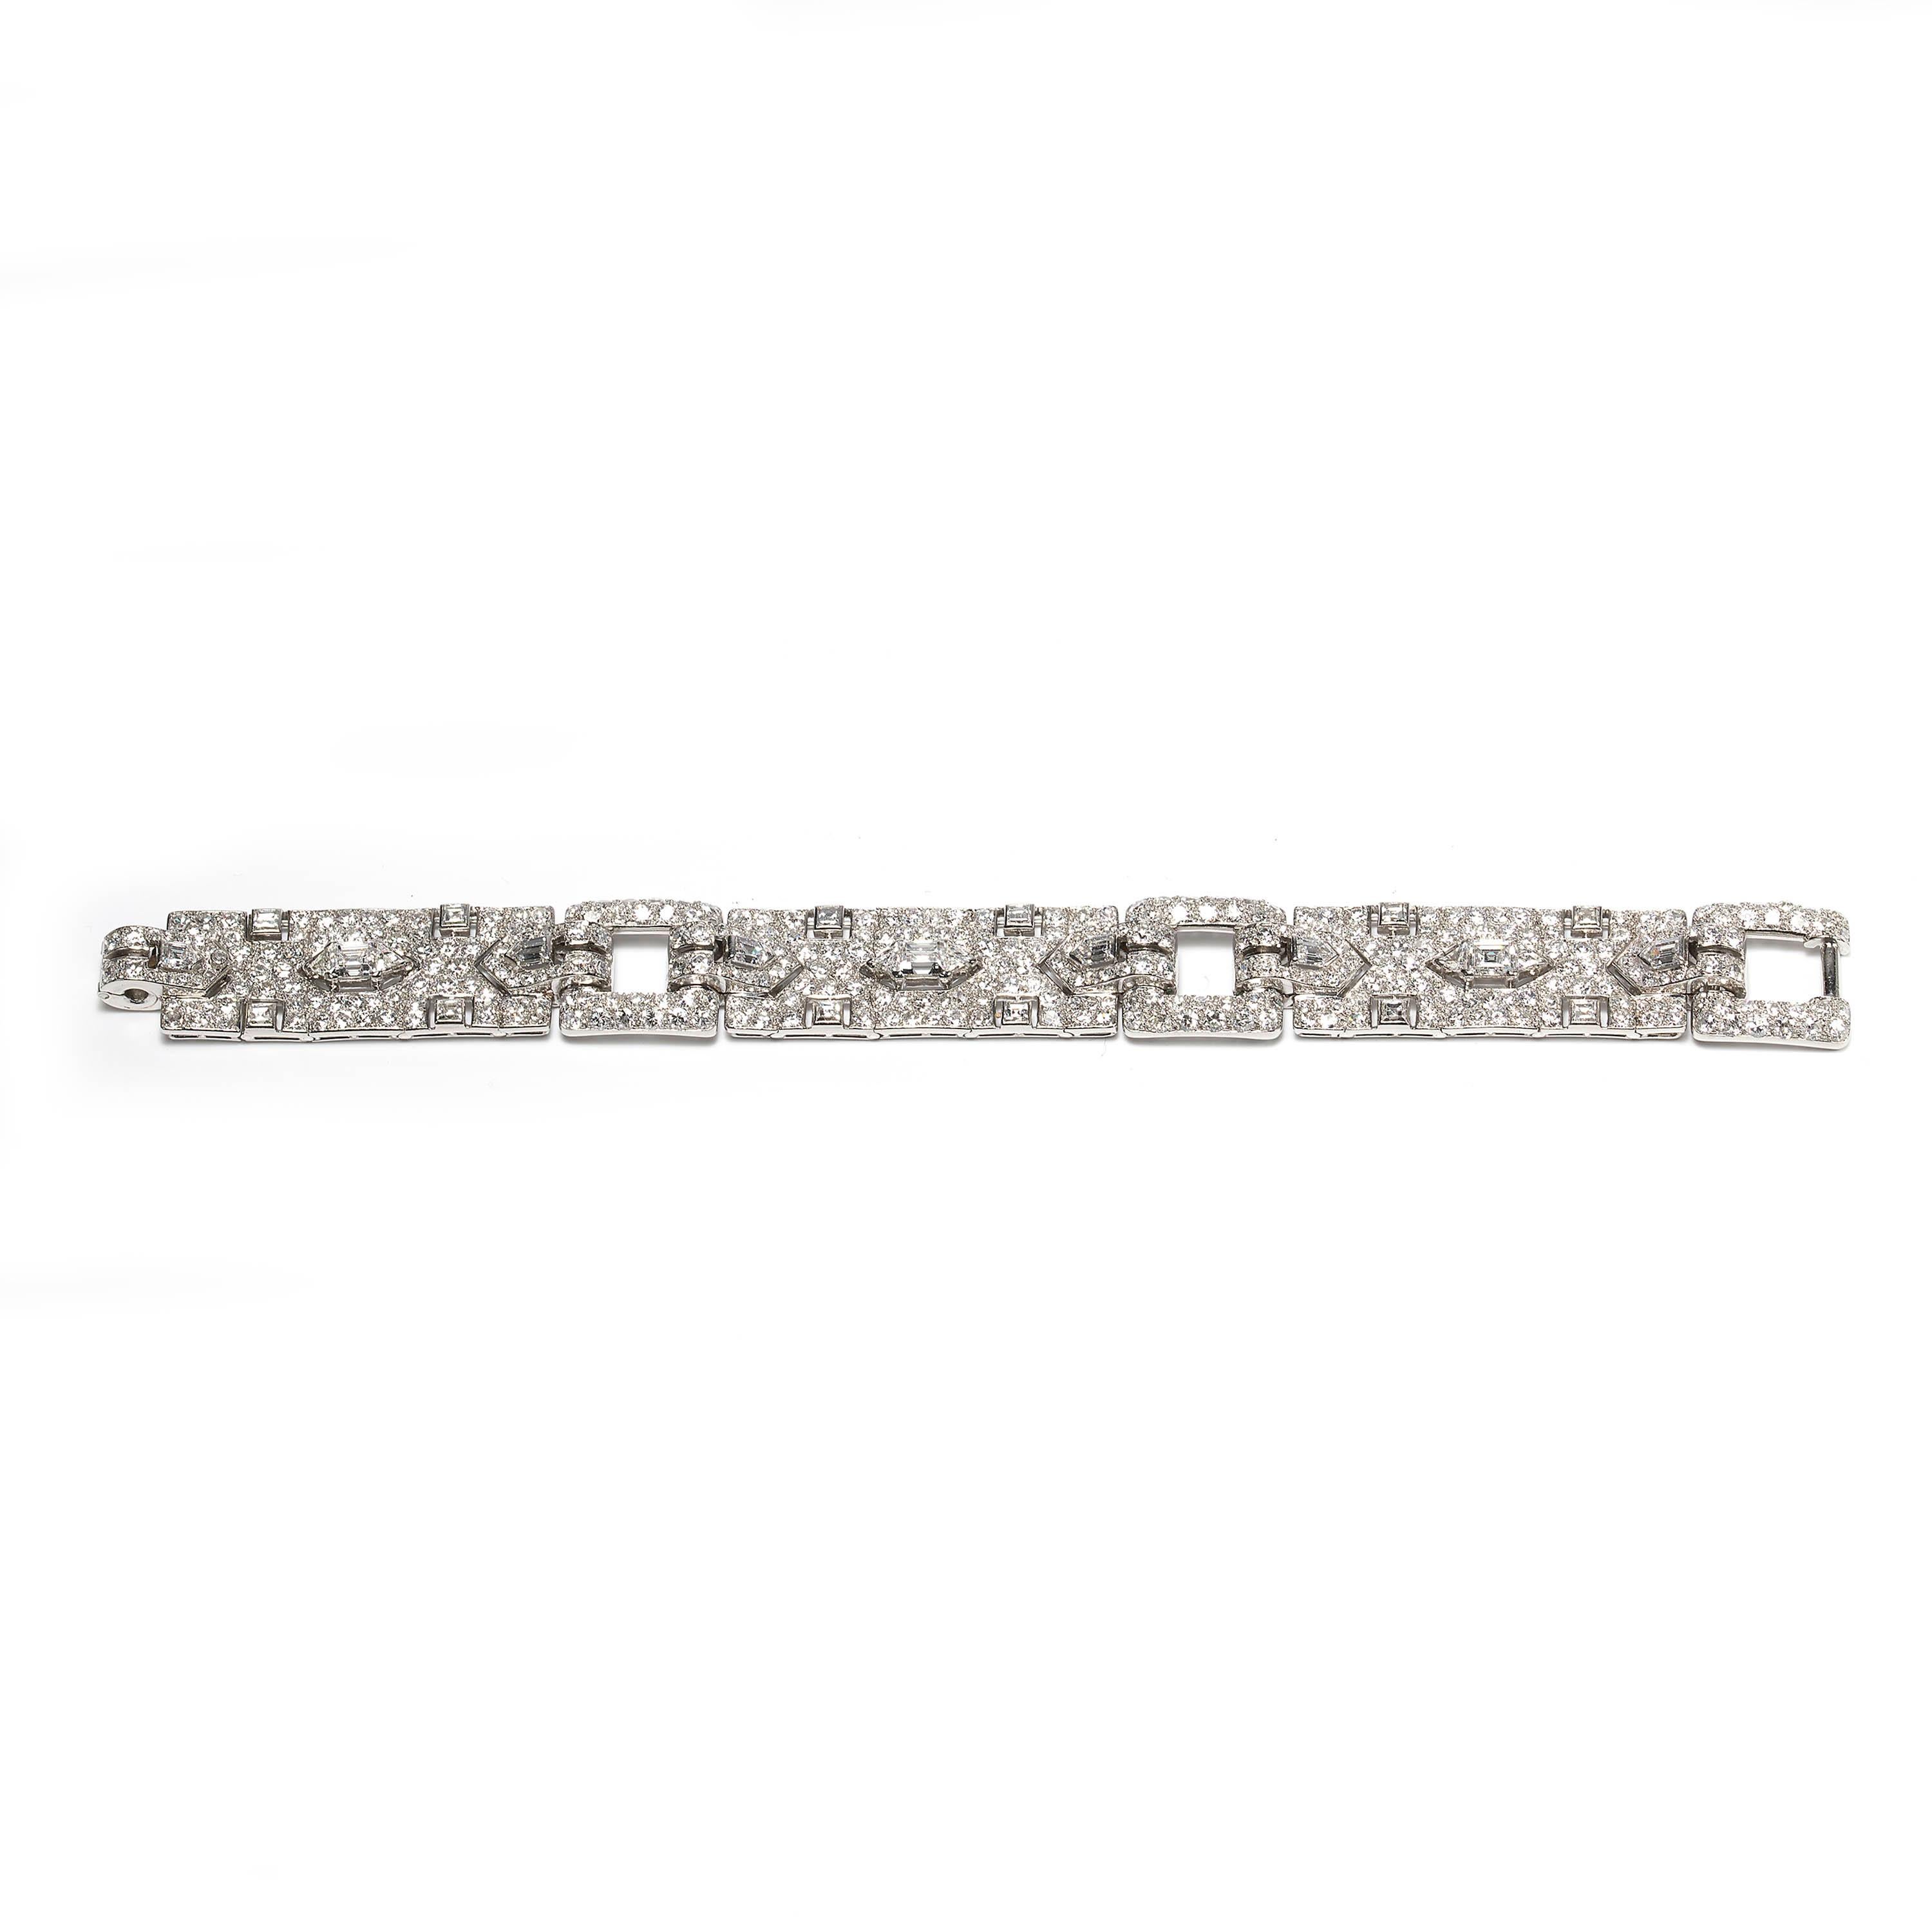 A vintage Cartier bracelet, comprised of three panels, each set with a central trap-cut diamond flanked by triangular and fancy-cut diamonds, with transitional brilliant-cut and single-cut diamonds surrounds, all mounted in platinum. The clasp is